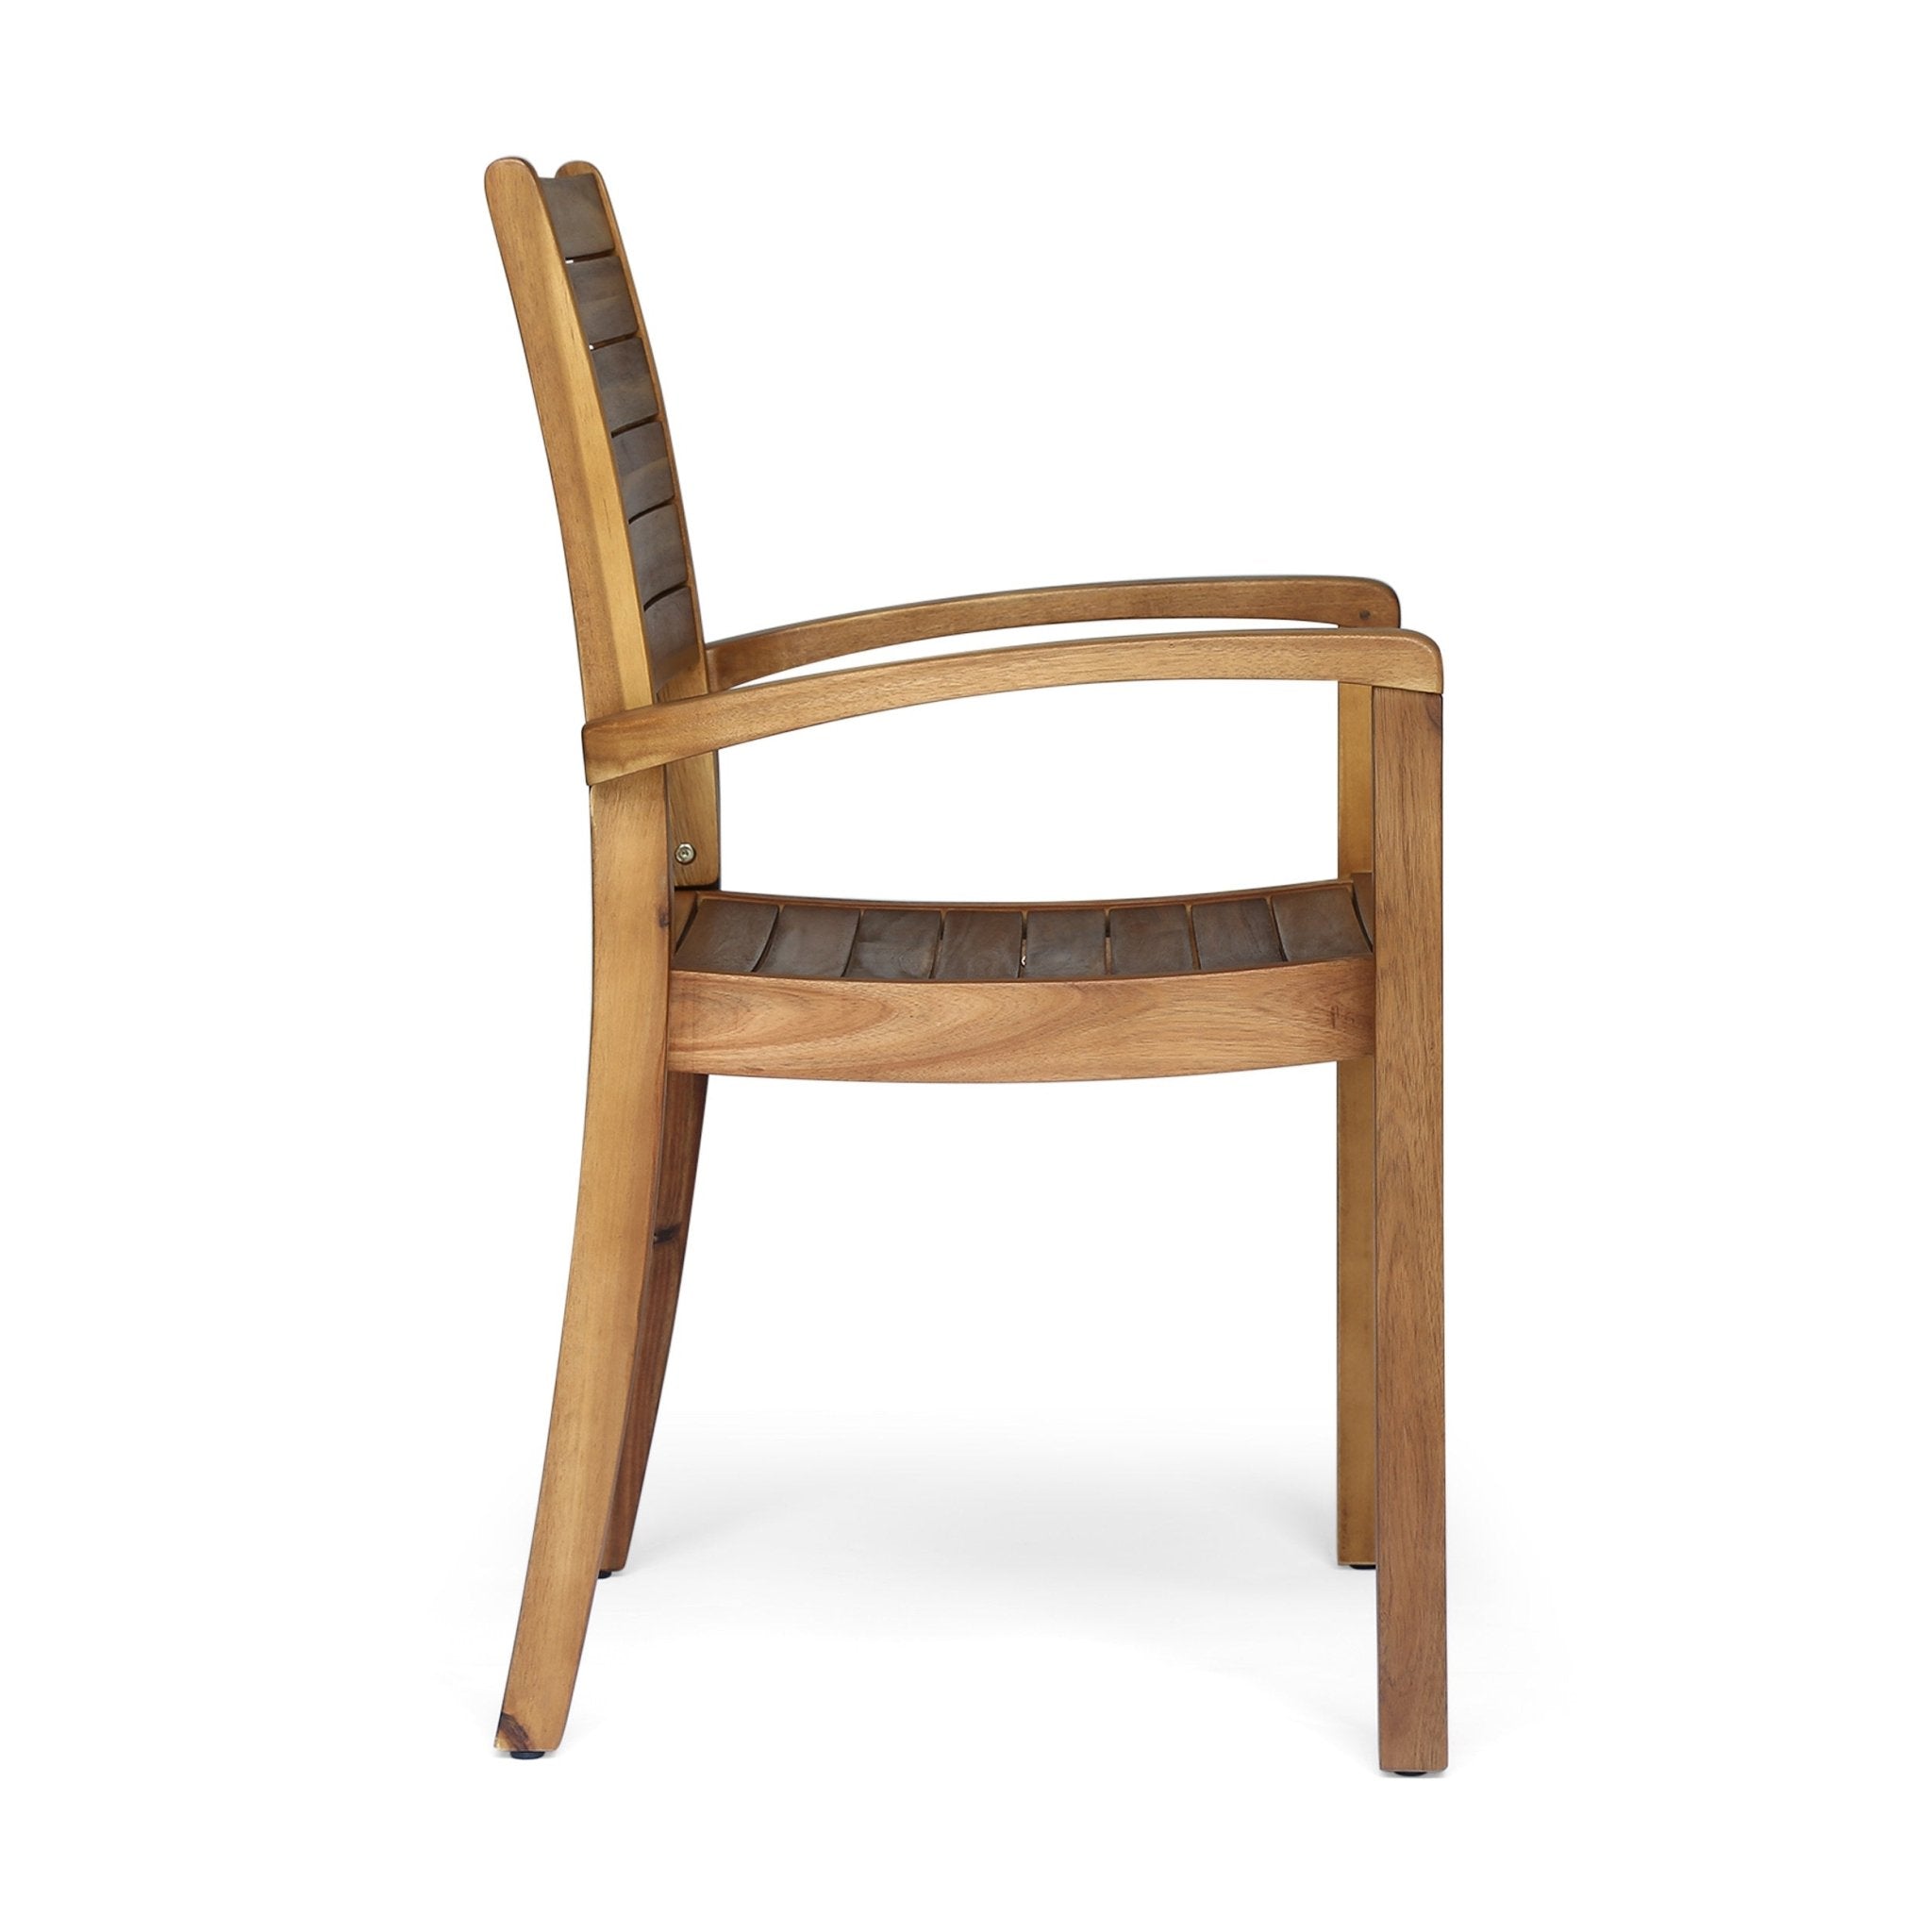 Outdoor Dining Chair with Square Arm and Wooden Frame - Outdoor Seating